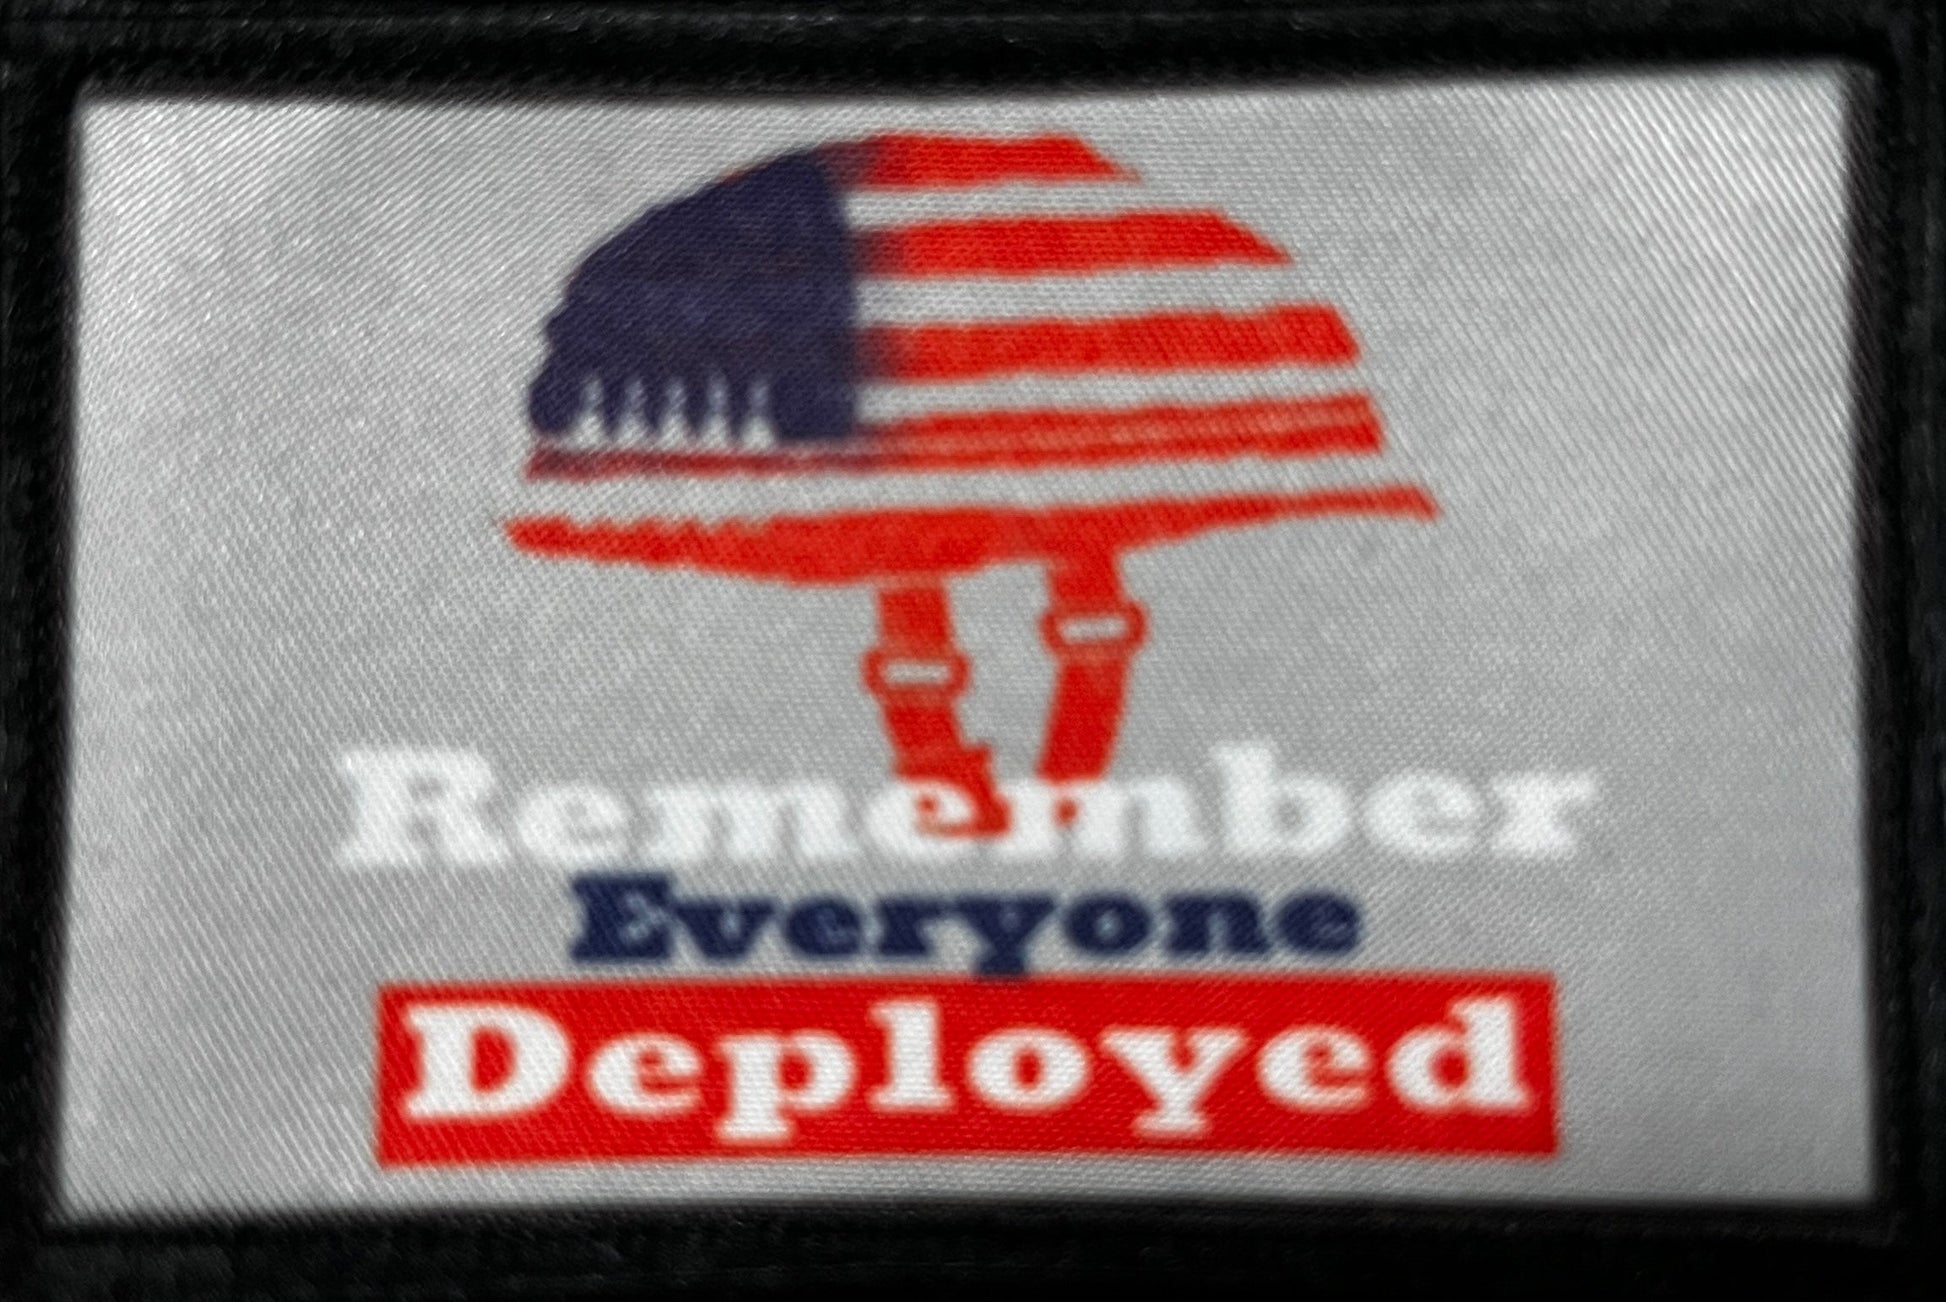 Remember Everyone Deployed Morale Patch Morale Patches Redheaded T Shirts 